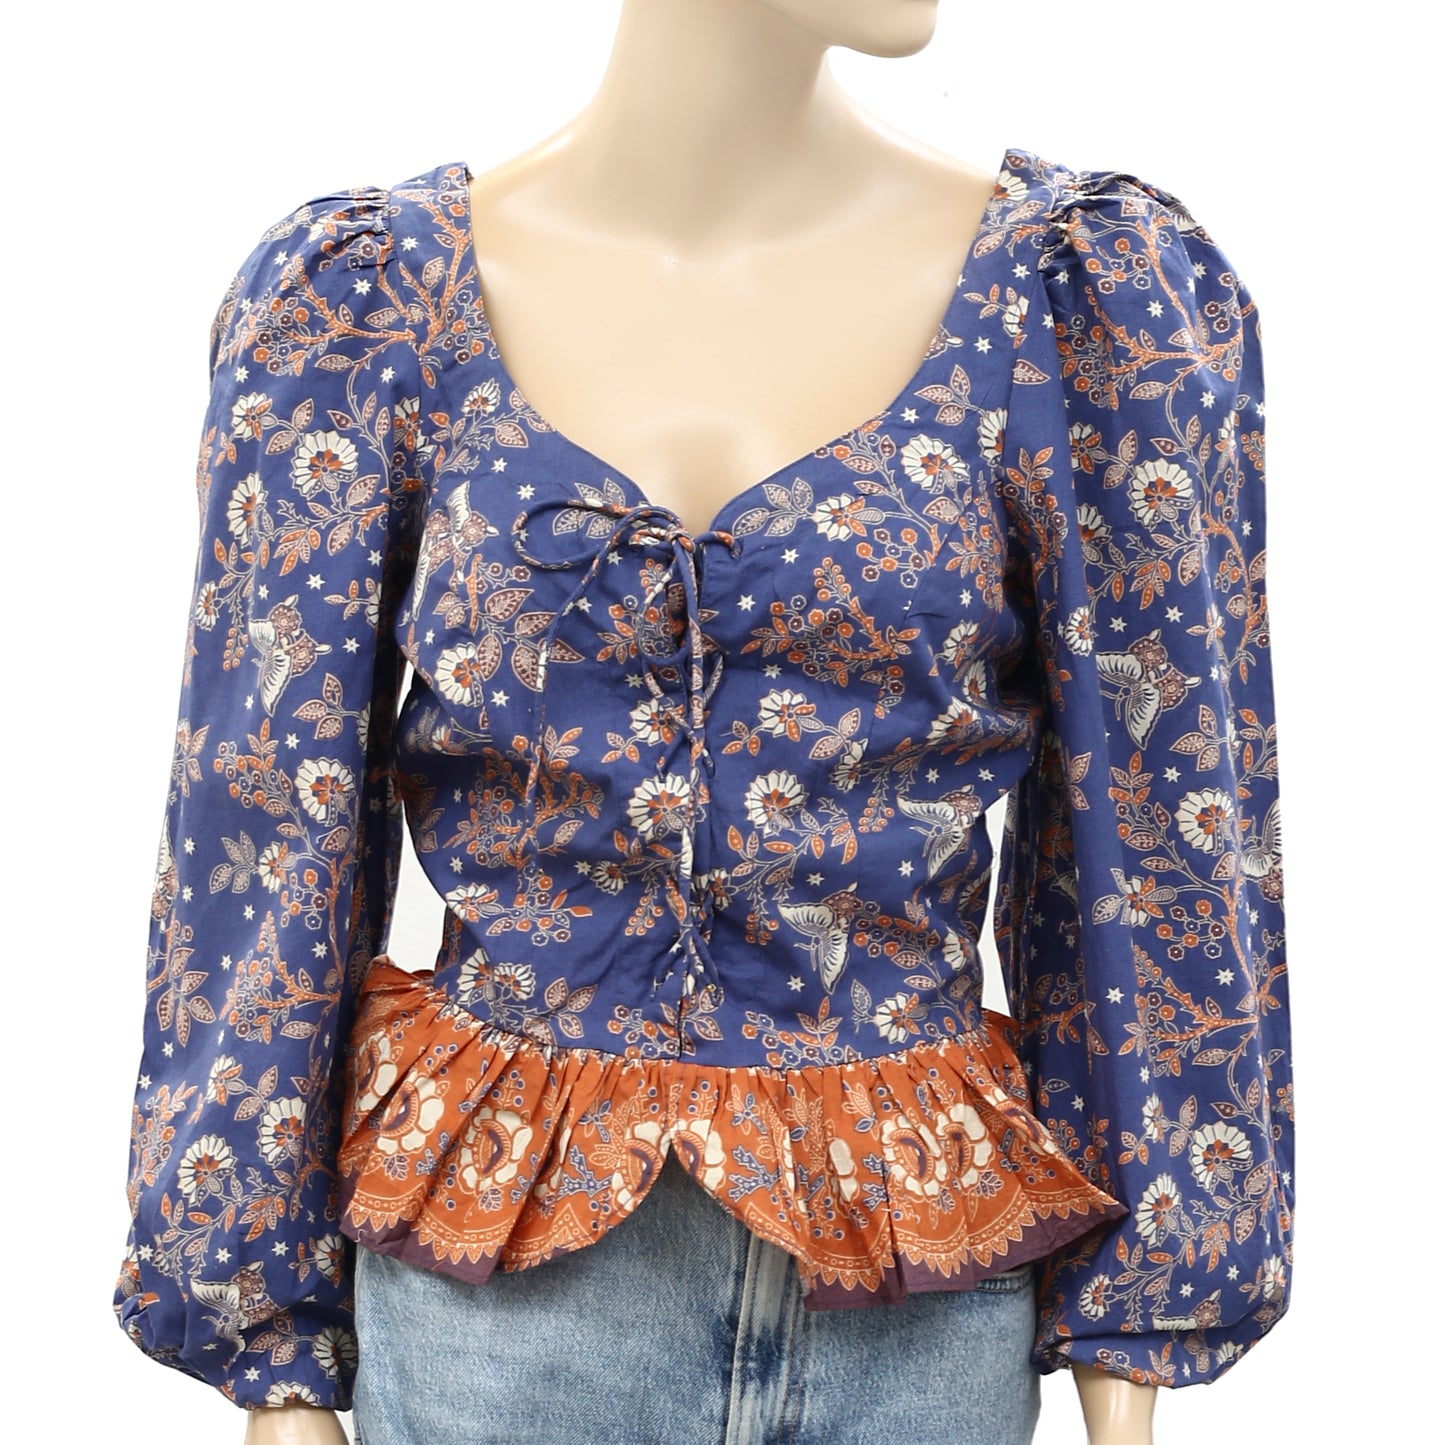 House of Harlow 1960 Smocked Floral Printed Blouse Top